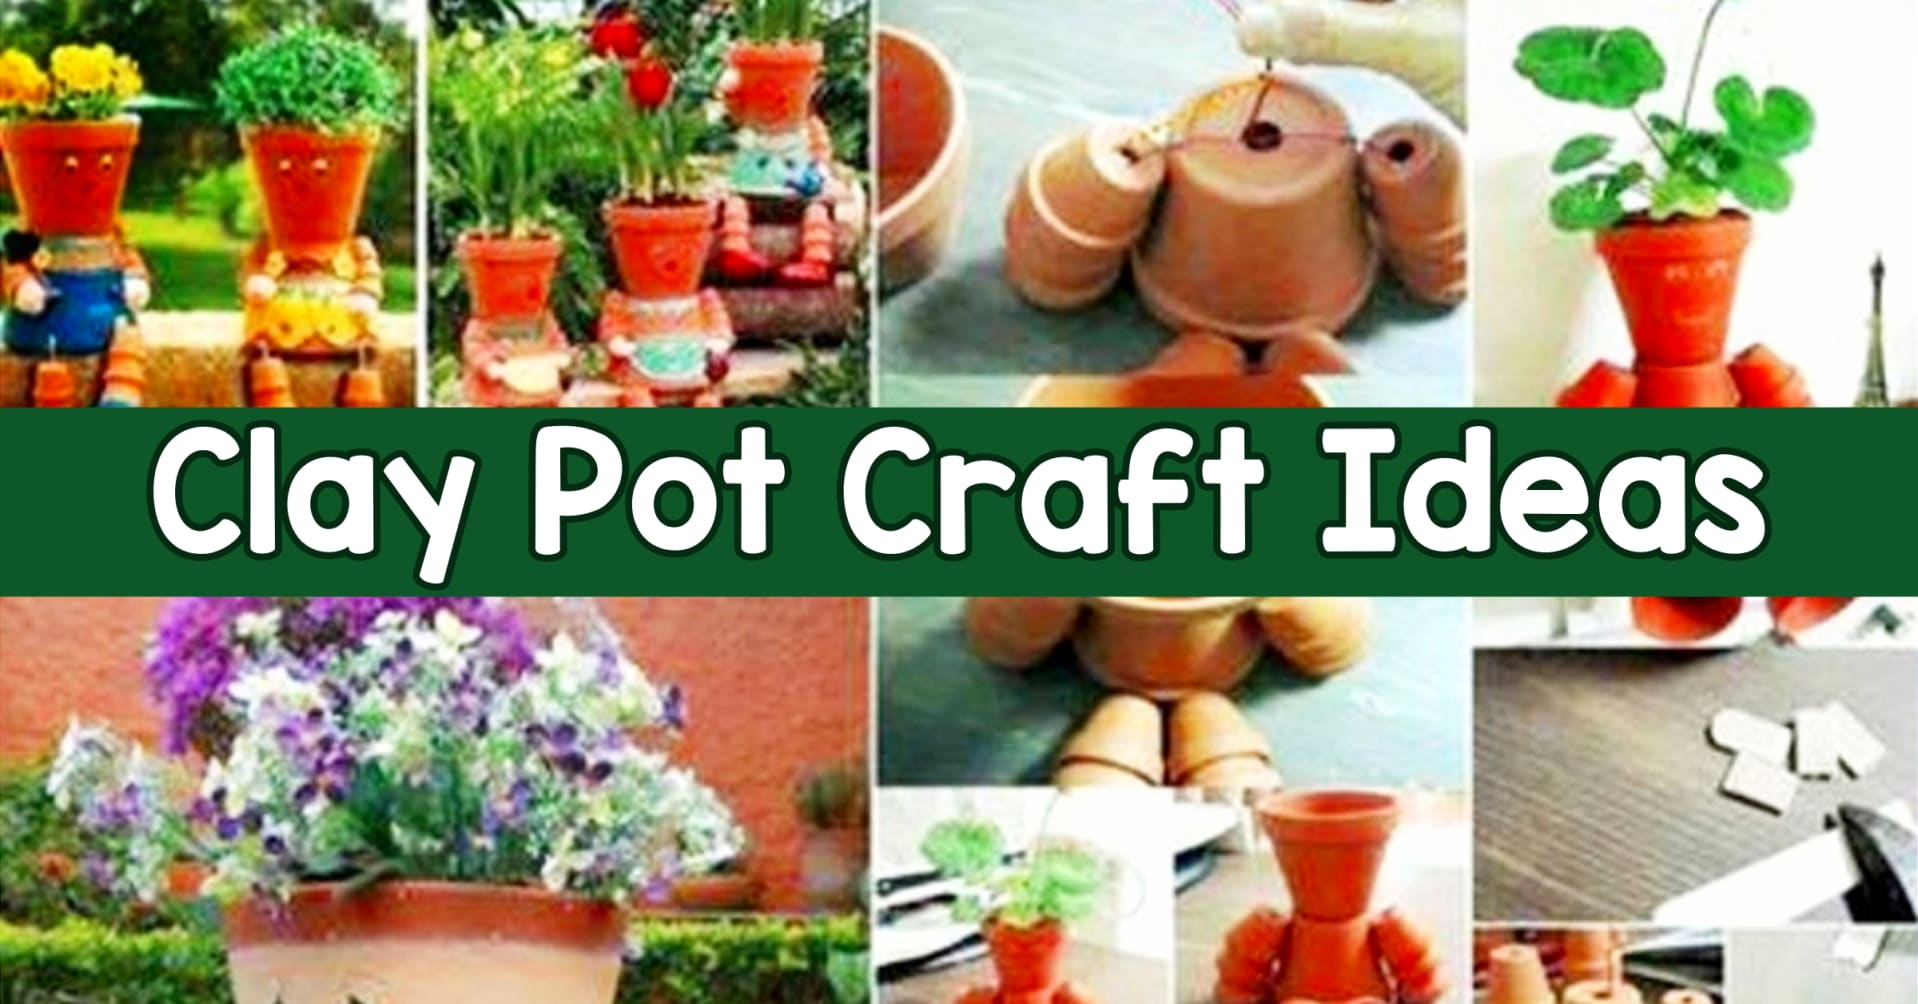 Decorative terra cotta pots - how to decorate clay pots for flowers and more craft ideas for clay pots for your yard, patio or home